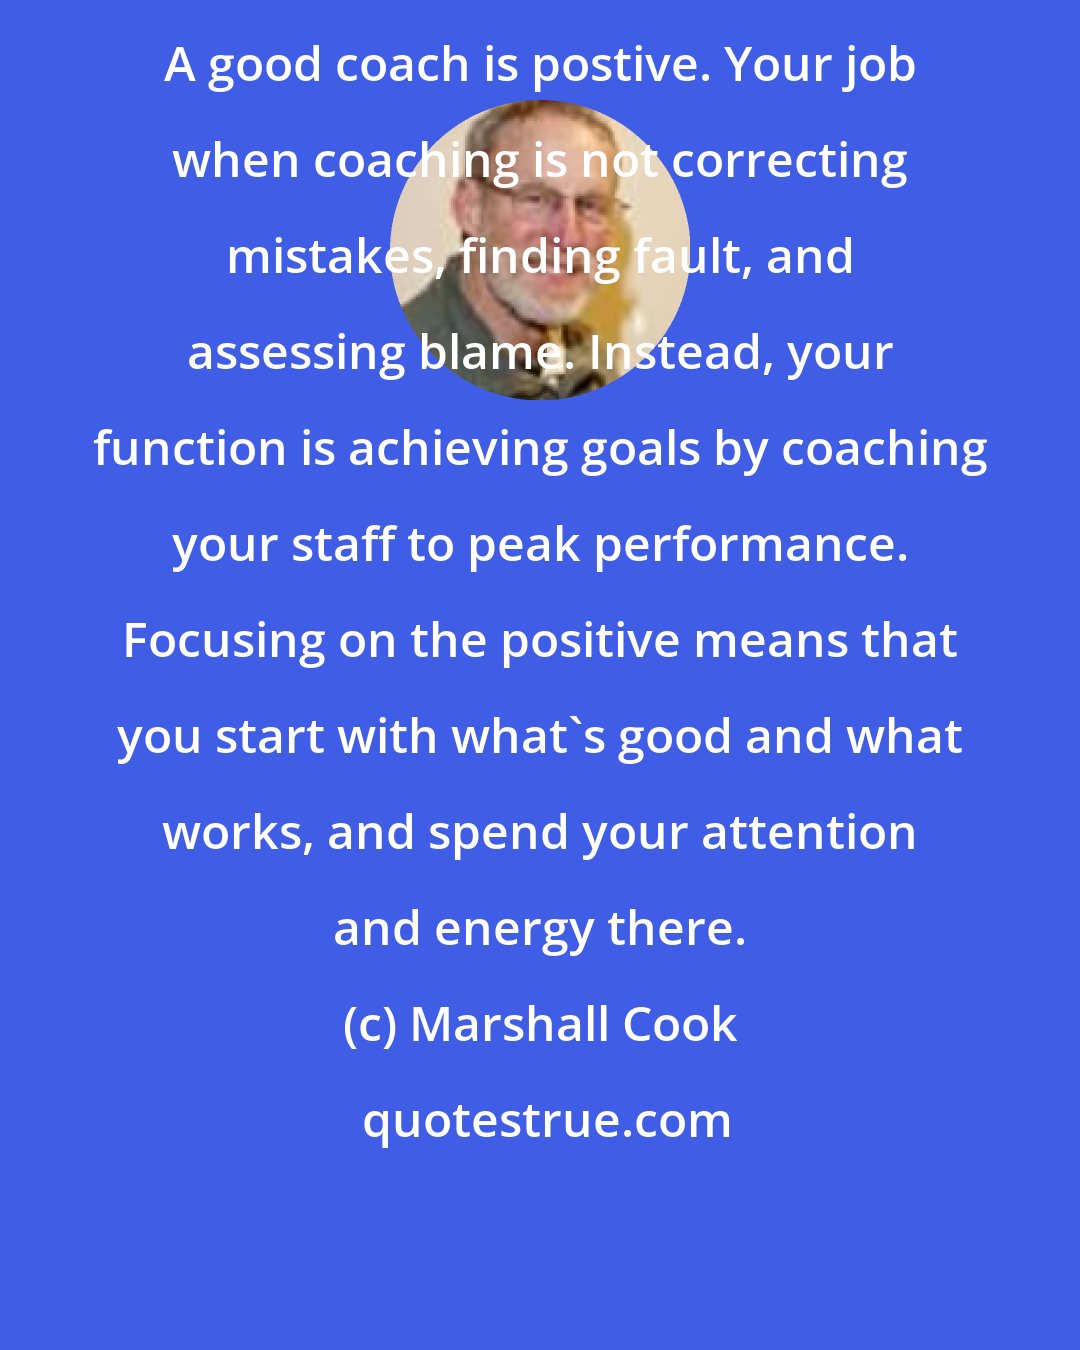 Marshall Cook: A good coach is postive. Your job when coaching is not correcting mistakes, finding fault, and assessing blame. Instead, your function is achieving goals by coaching your staff to peak performance. Focusing on the positive means that you start with what's good and what works, and spend your attention and energy there.